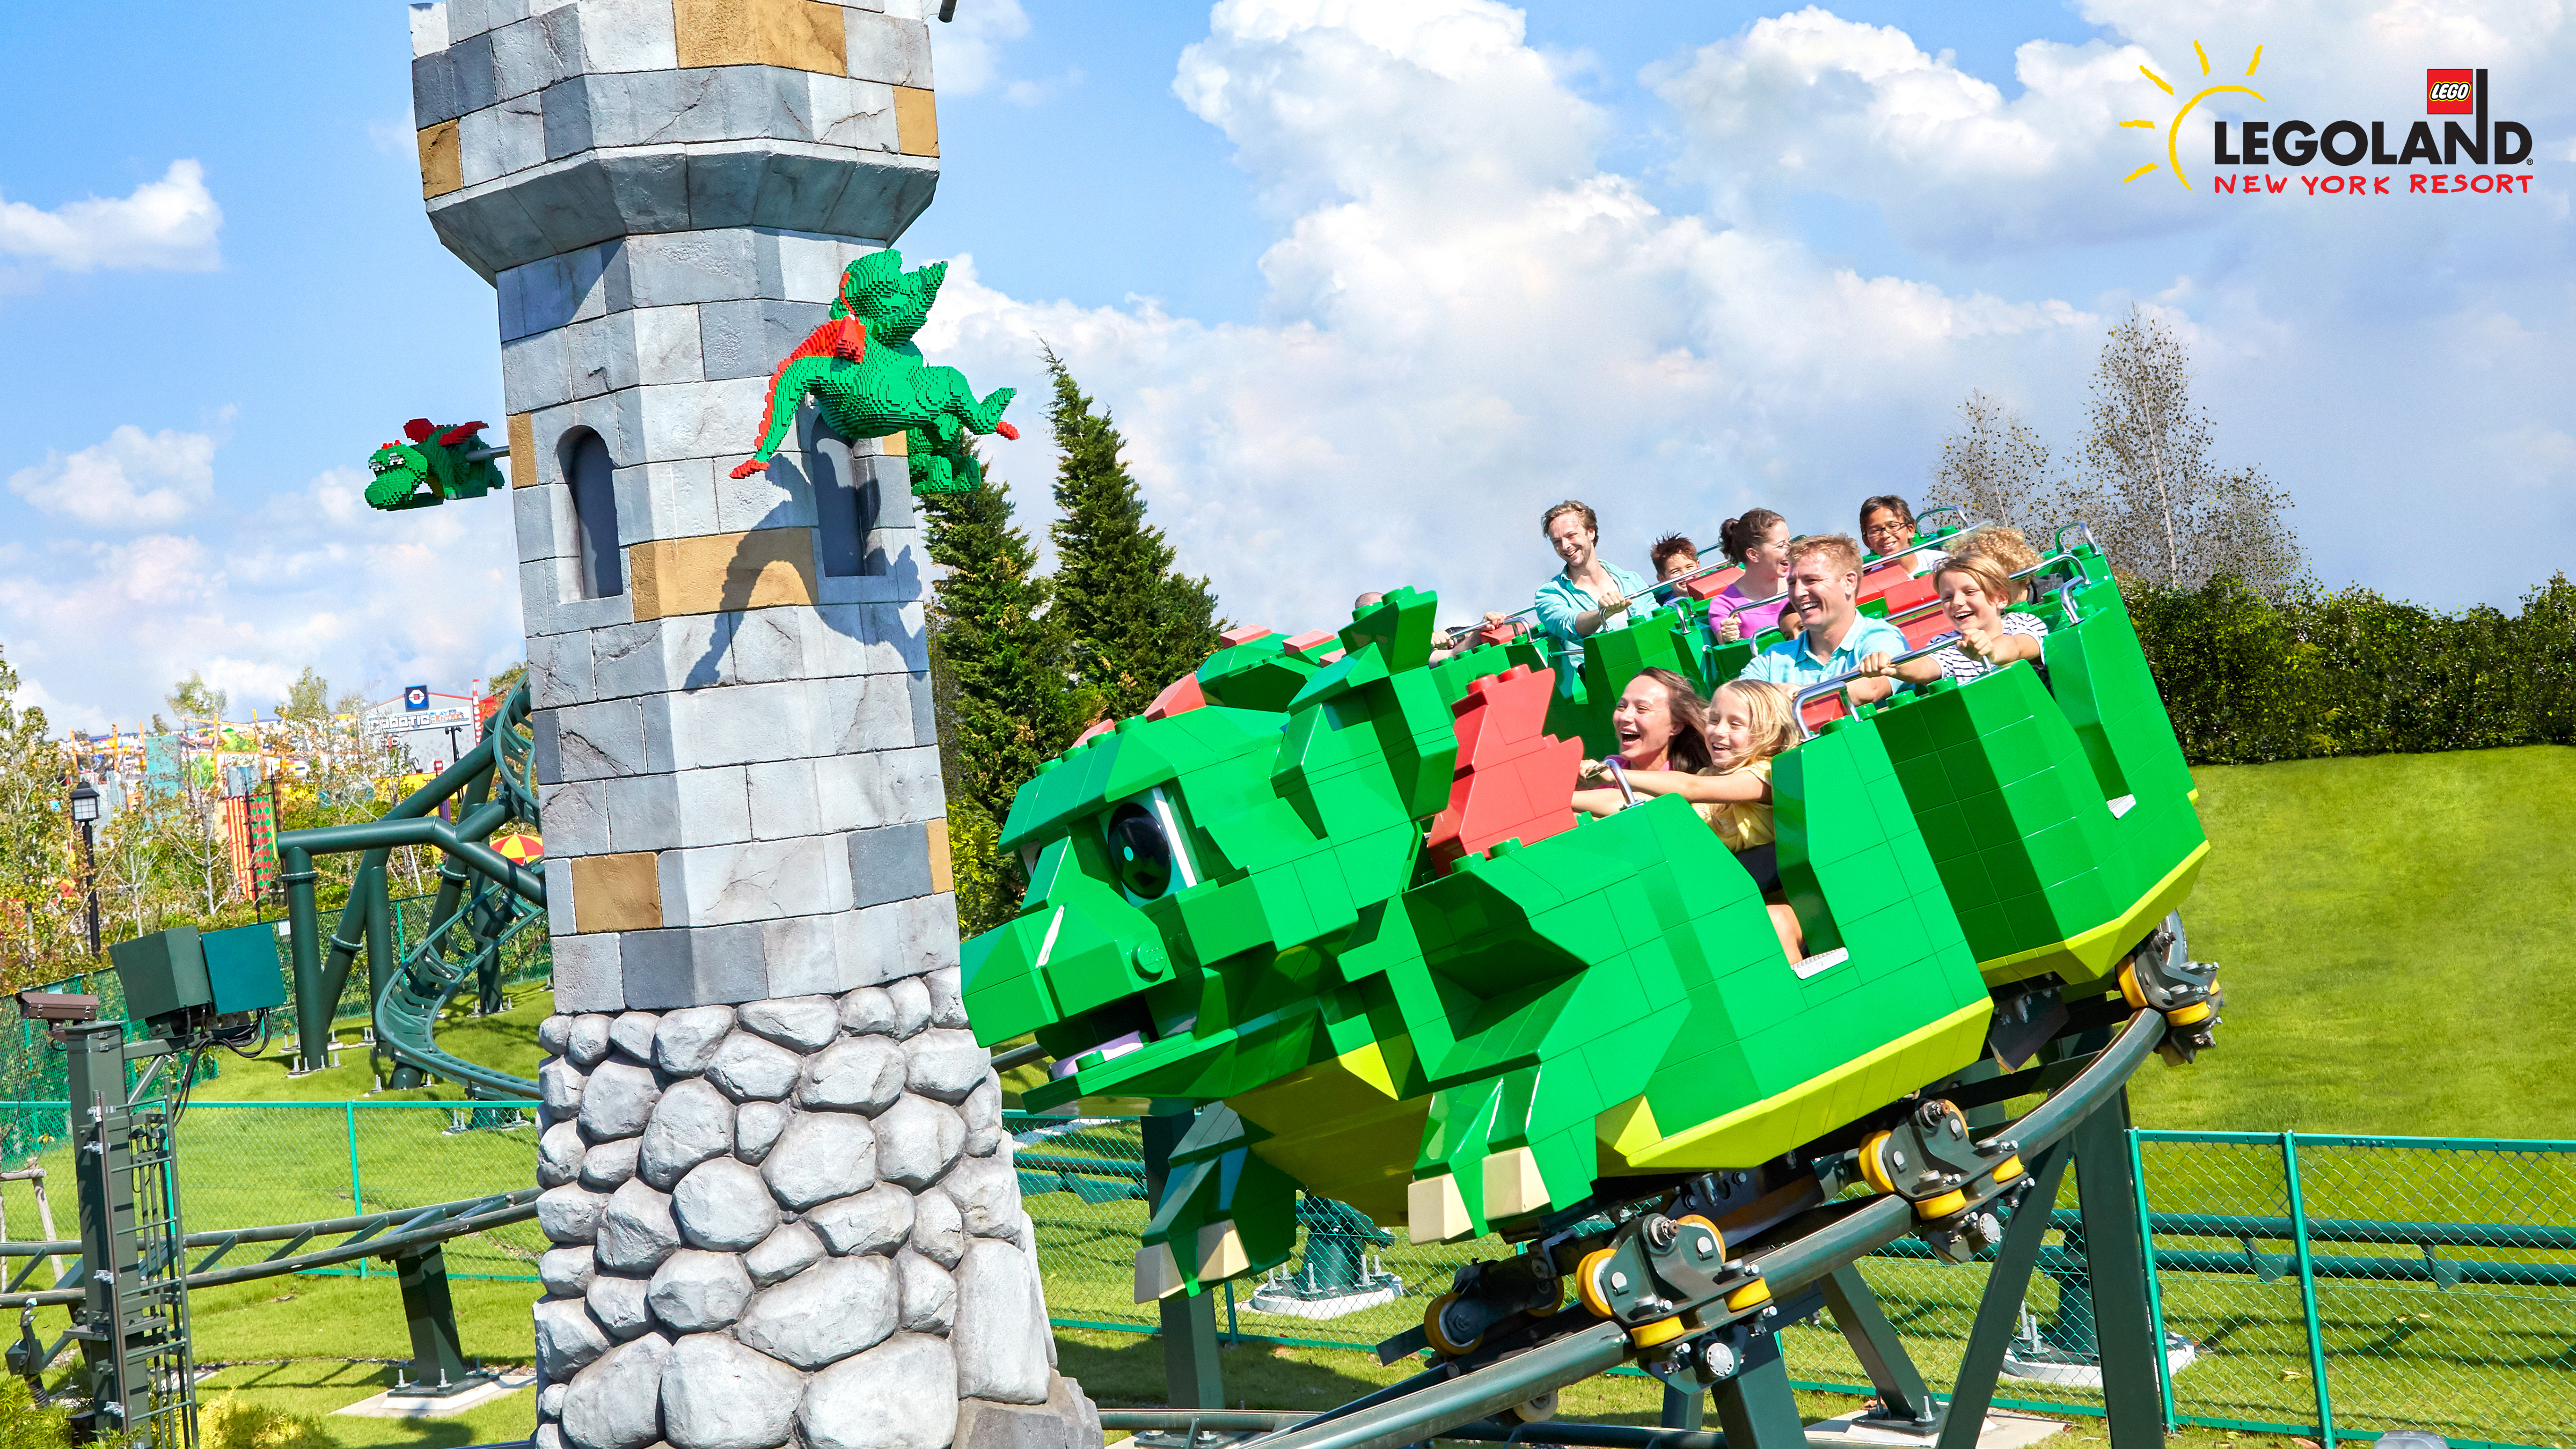 LEGOLAND New York Resort opens for the season this weekend 